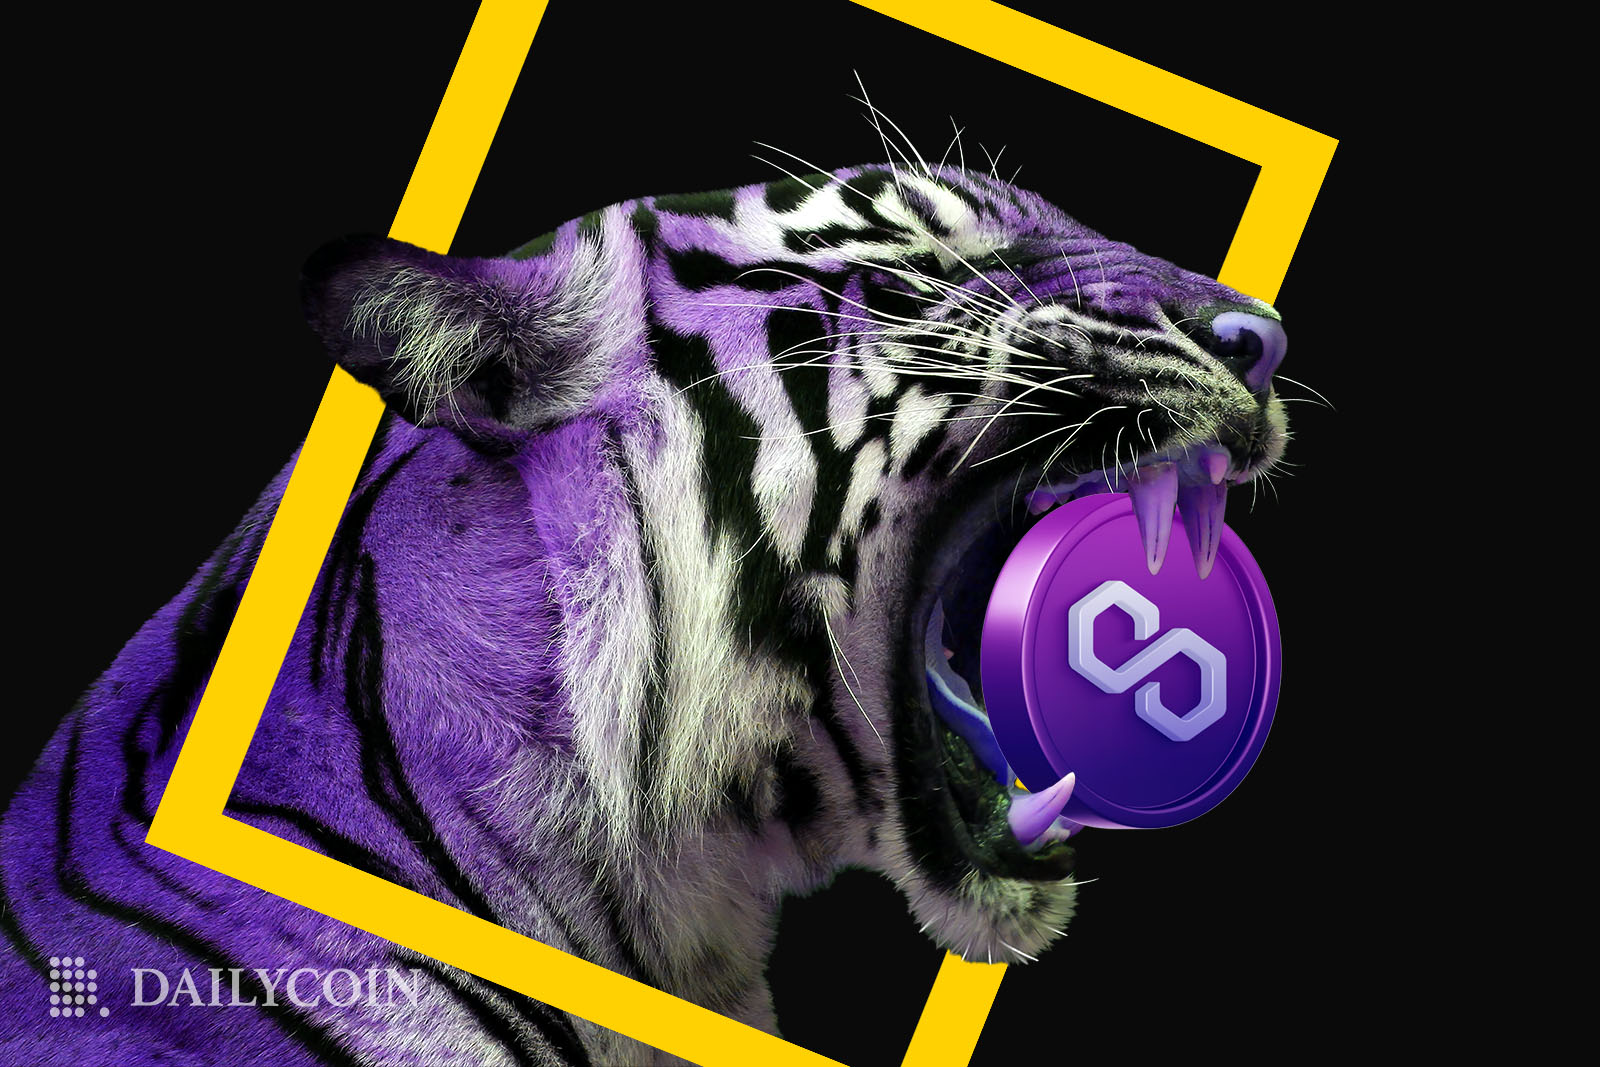 Purple tiger in a yellow National Geographic logo frame roaring with a Polygon Matic coin in his mouth.